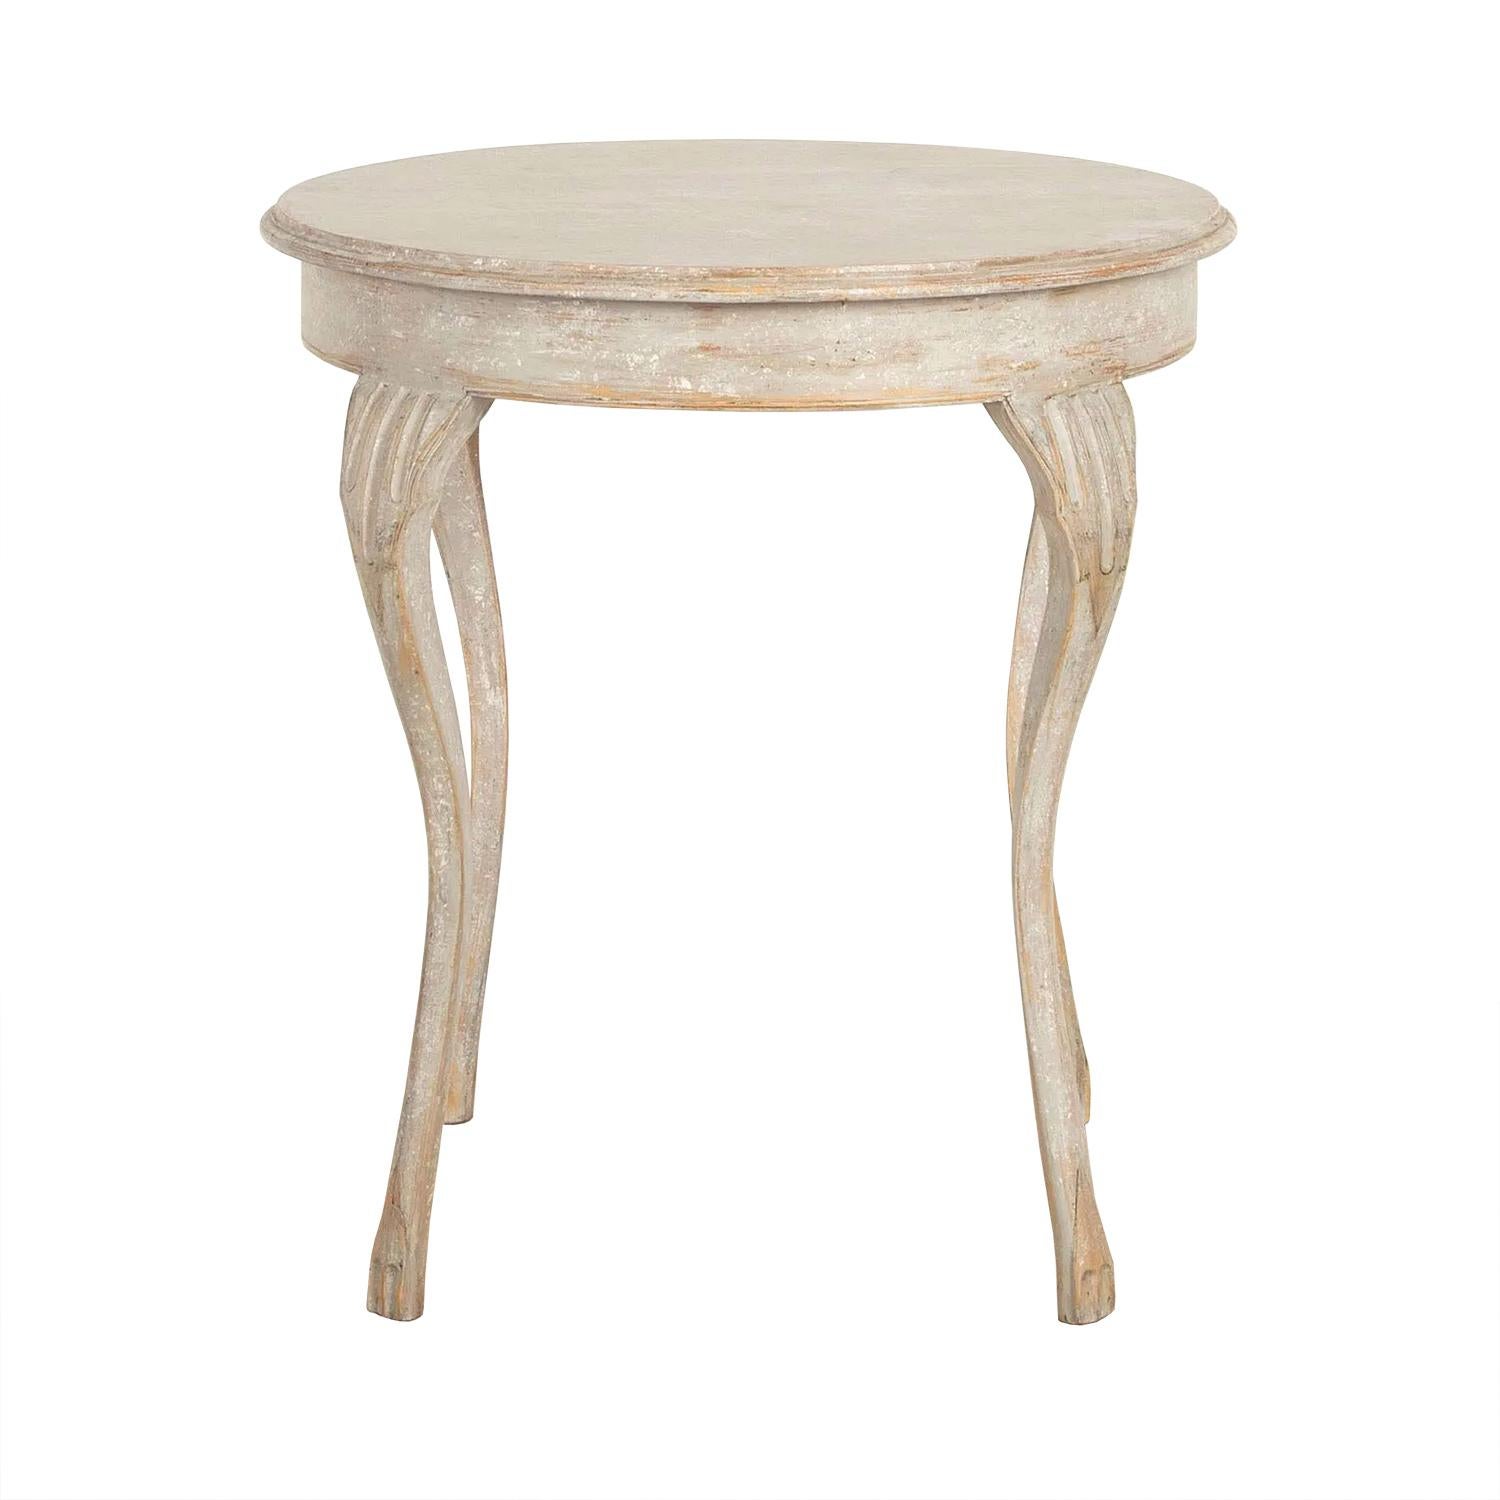 Elegantly proportioned decorative 19th century Swedish table with a round top and decorative curved feature legs. This piece has been repainted.